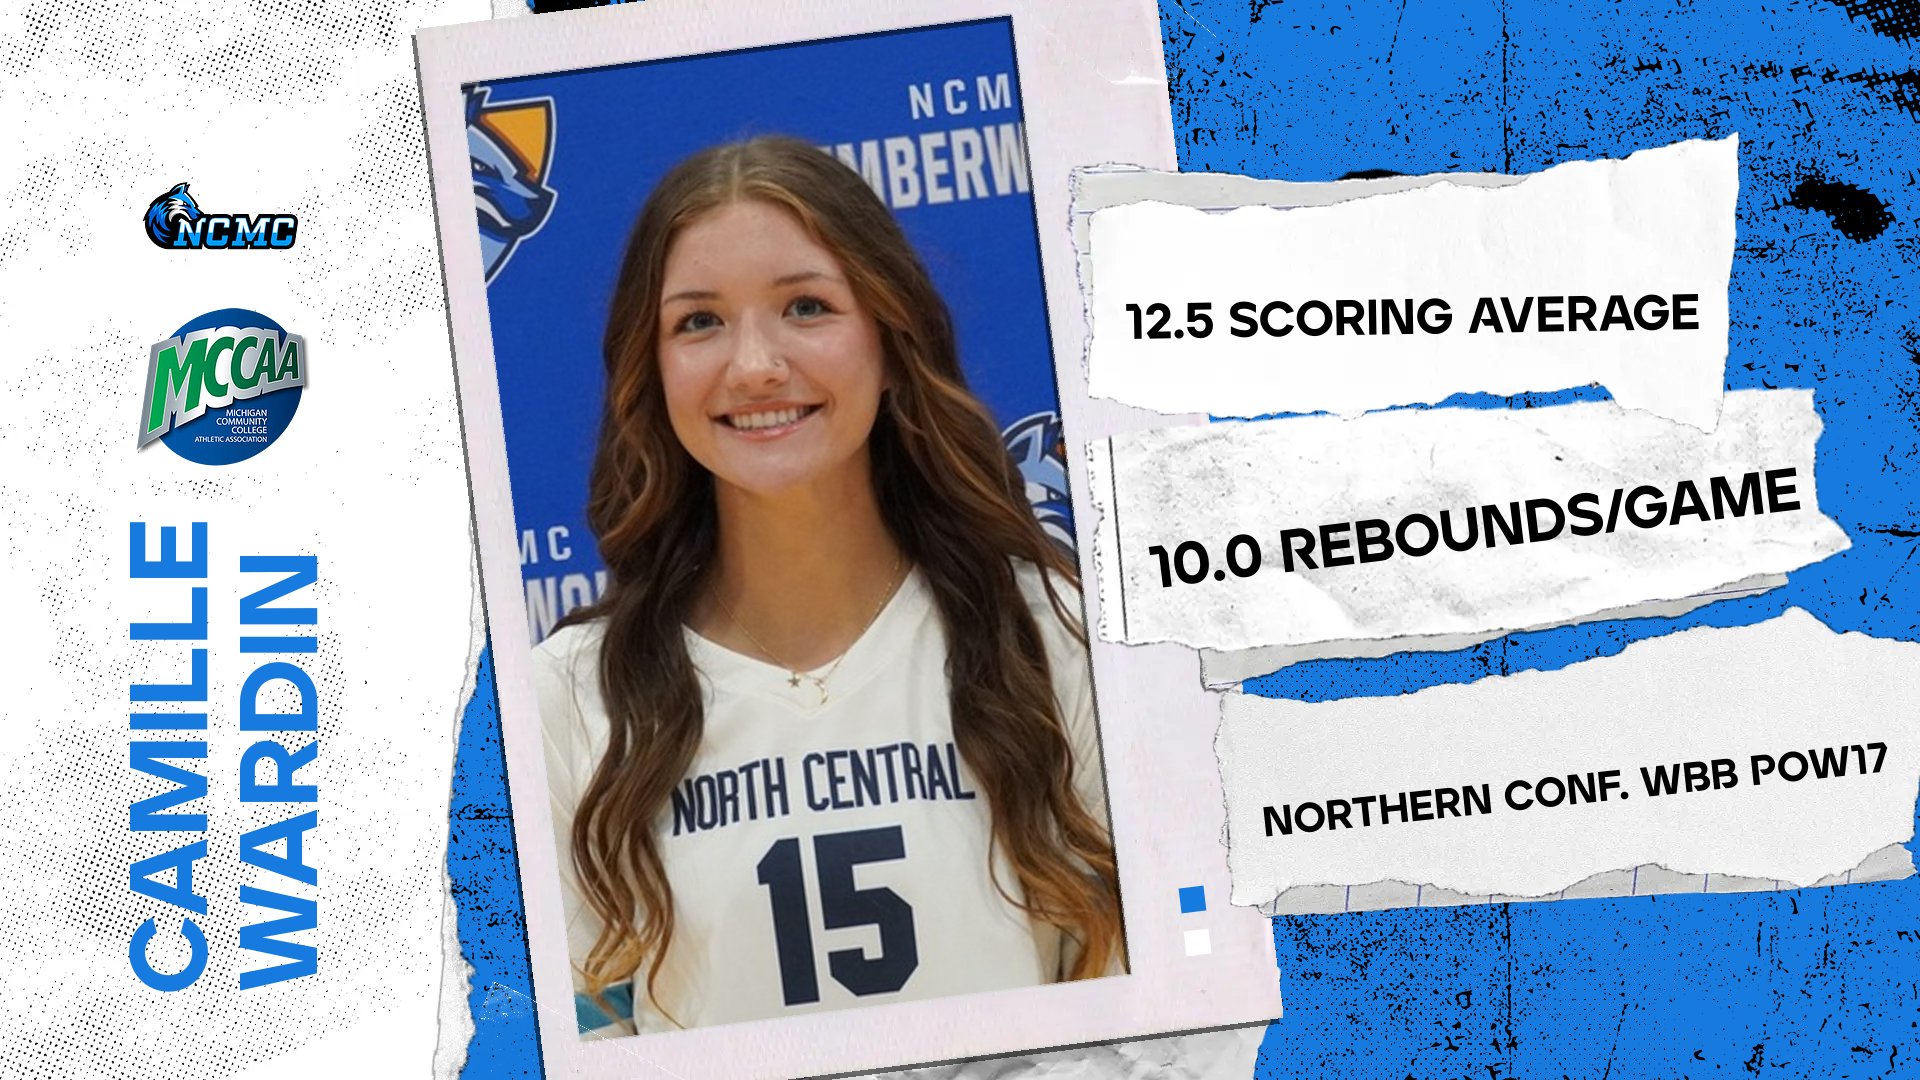 NCMC's Wardin Debuts with MCCAA Northern Conference Women's Basketball Player of the Week17 Nod